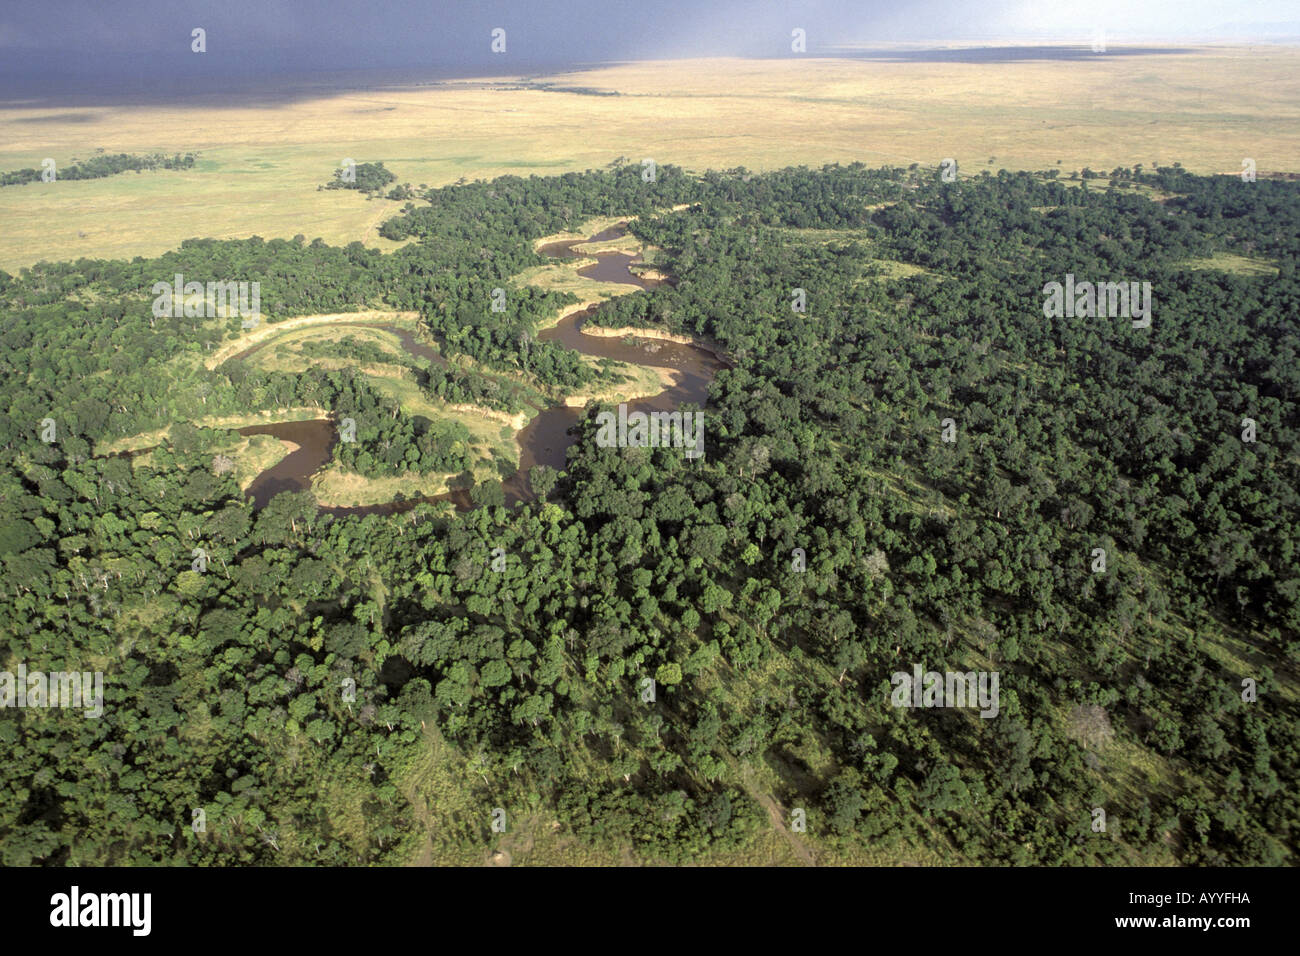 African landscape, gallery forest with savanna, aerial view, Kenya, Masai Mara Stock Photo